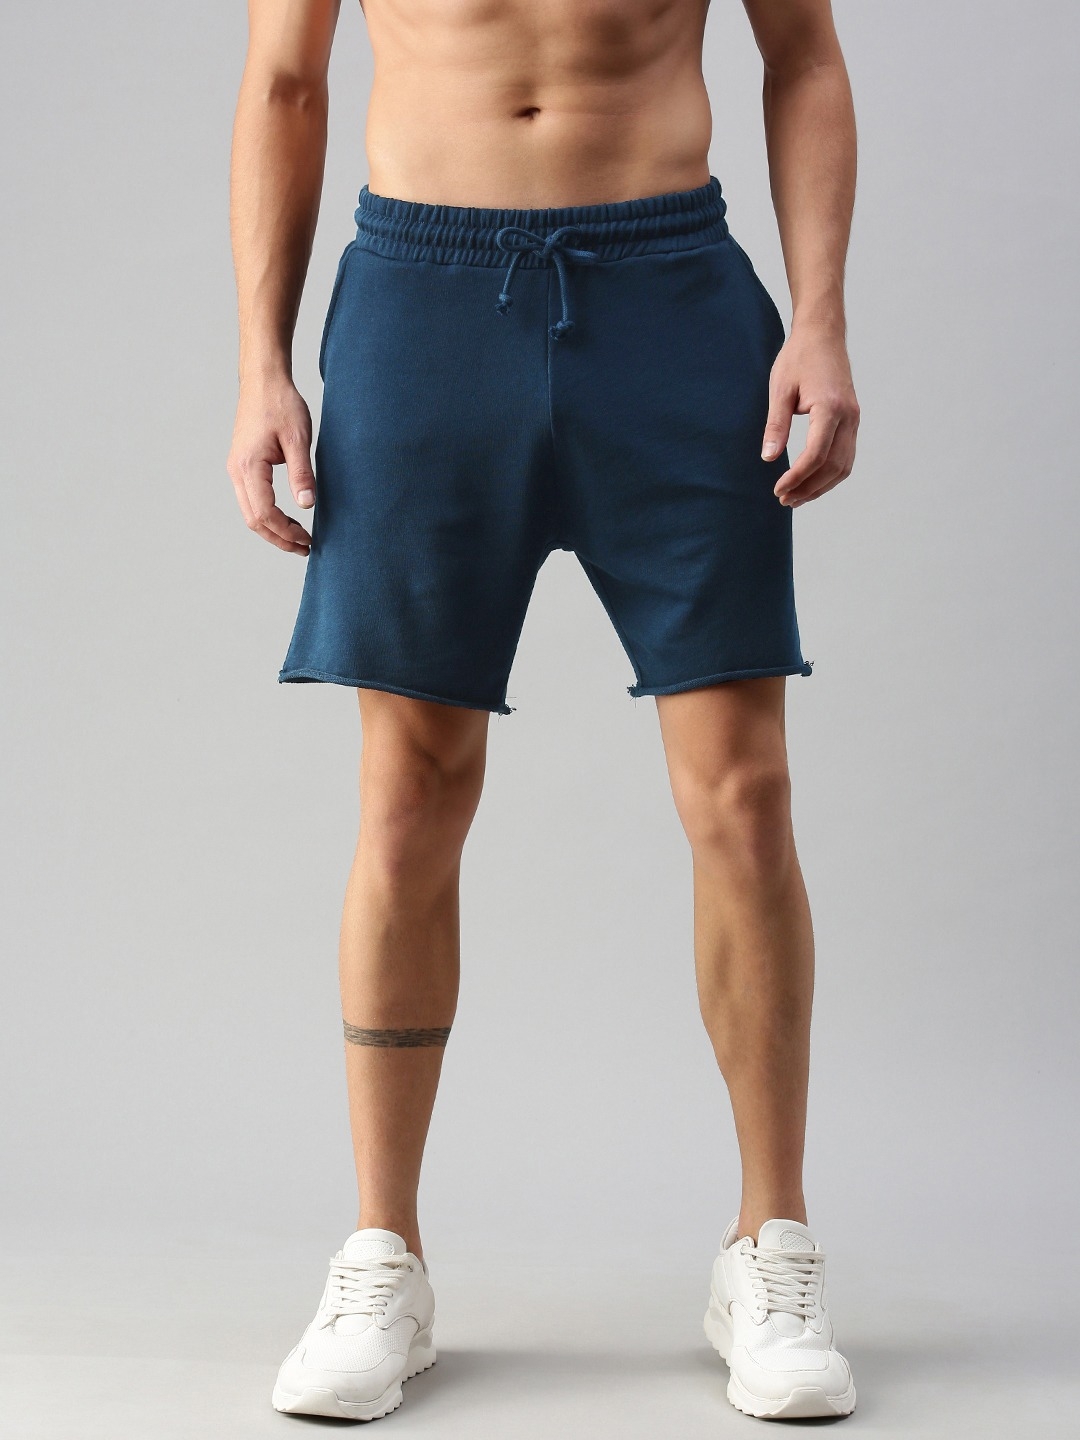 The Bear House | Men's Knitted Shorts